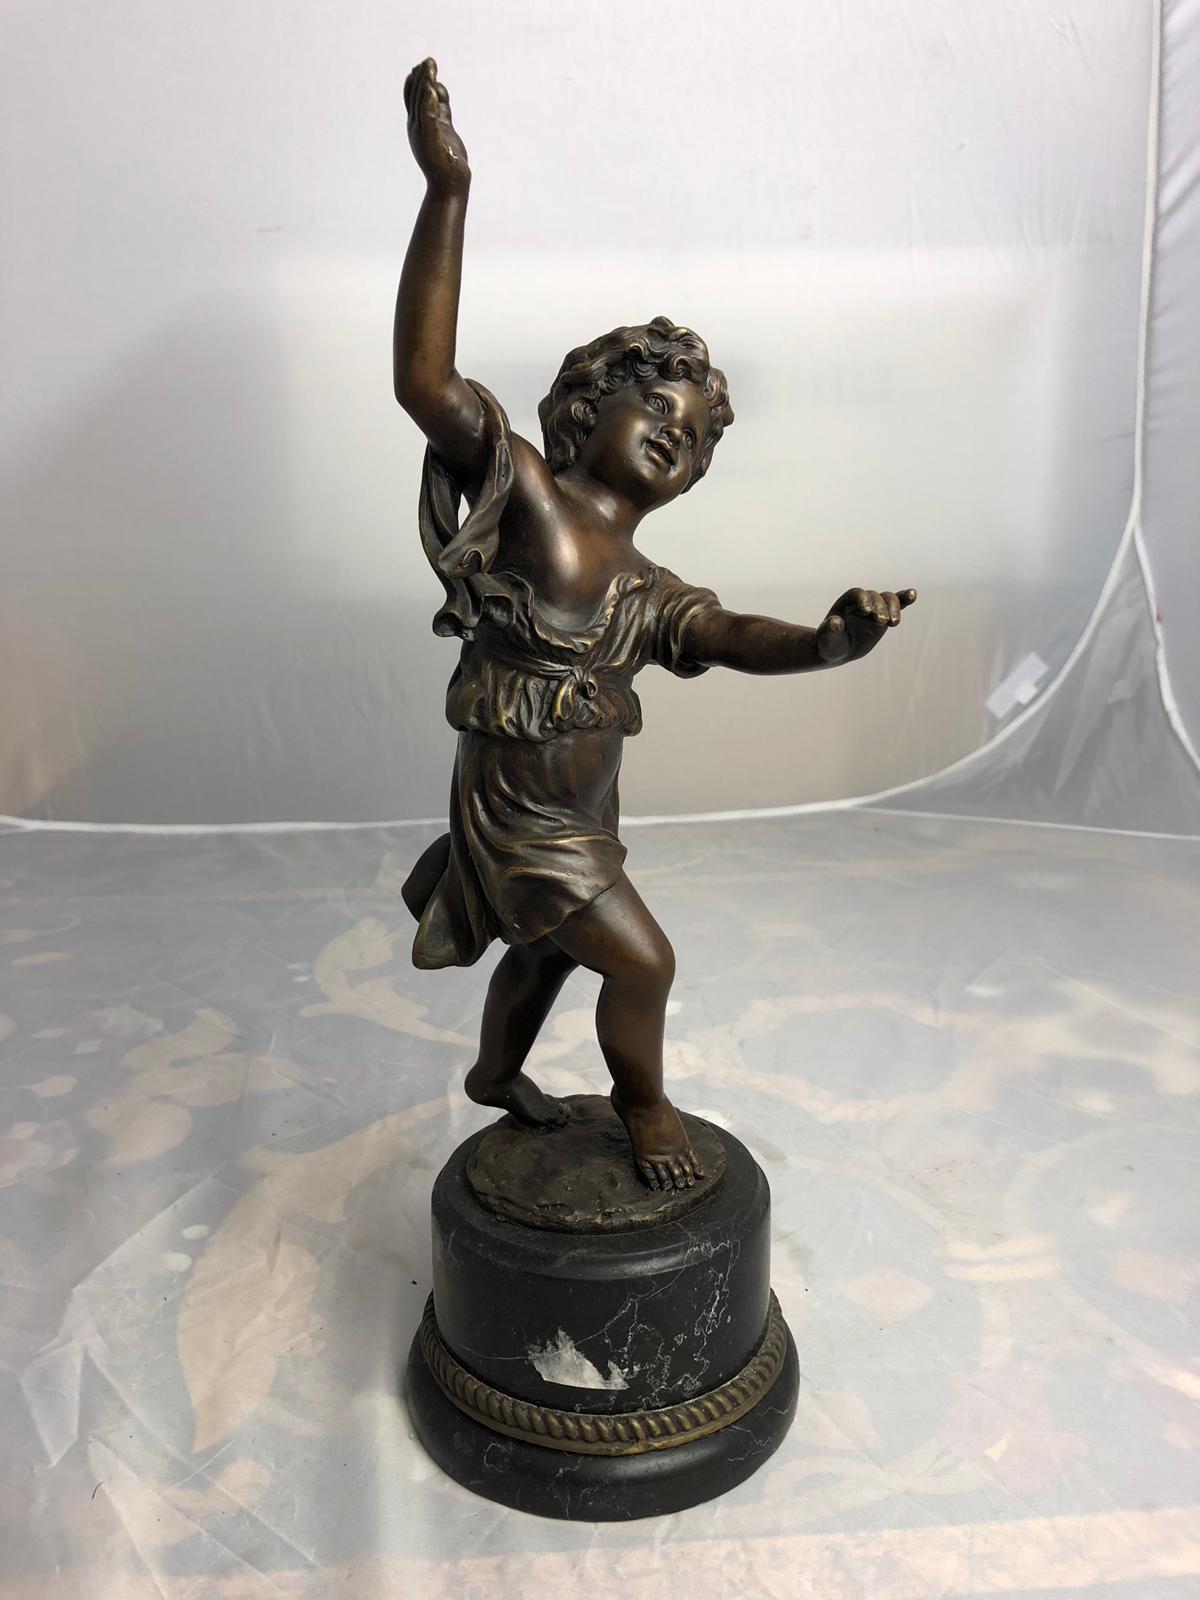 A 20th century dancing child bronze. A Playful bronze figure of a little girl that can dance with the greatest of ease. An eye-catching matching many styles, from Baroque to contemporary. For the dresser or display a pretty accessory in the house.